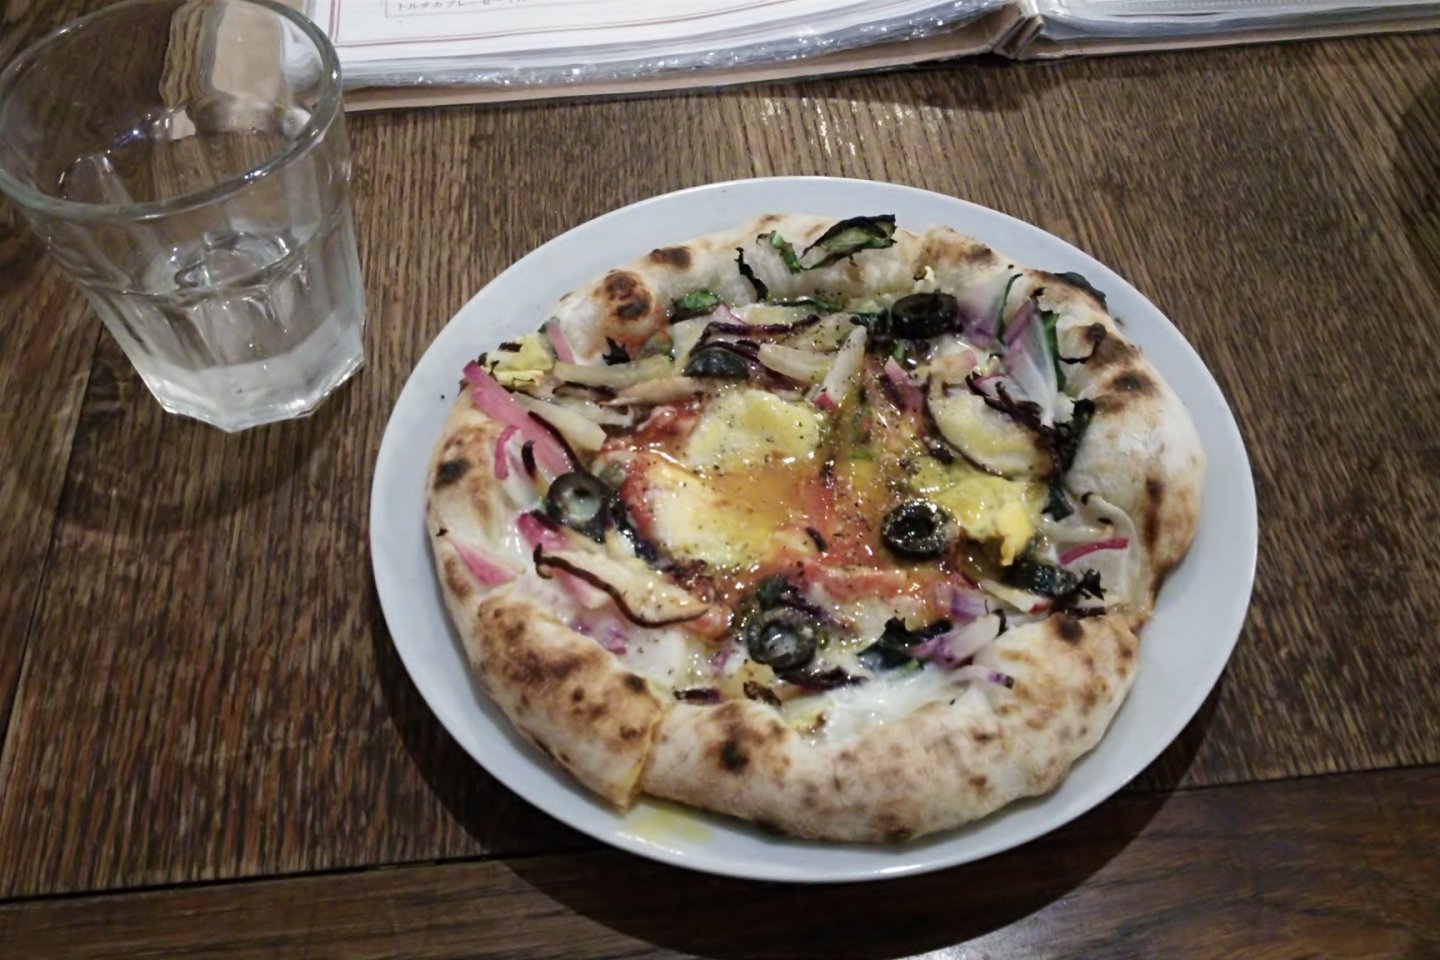 An eat-in exclusive pizza, with 10 seasonal vegetables, capers and rich egg yolk